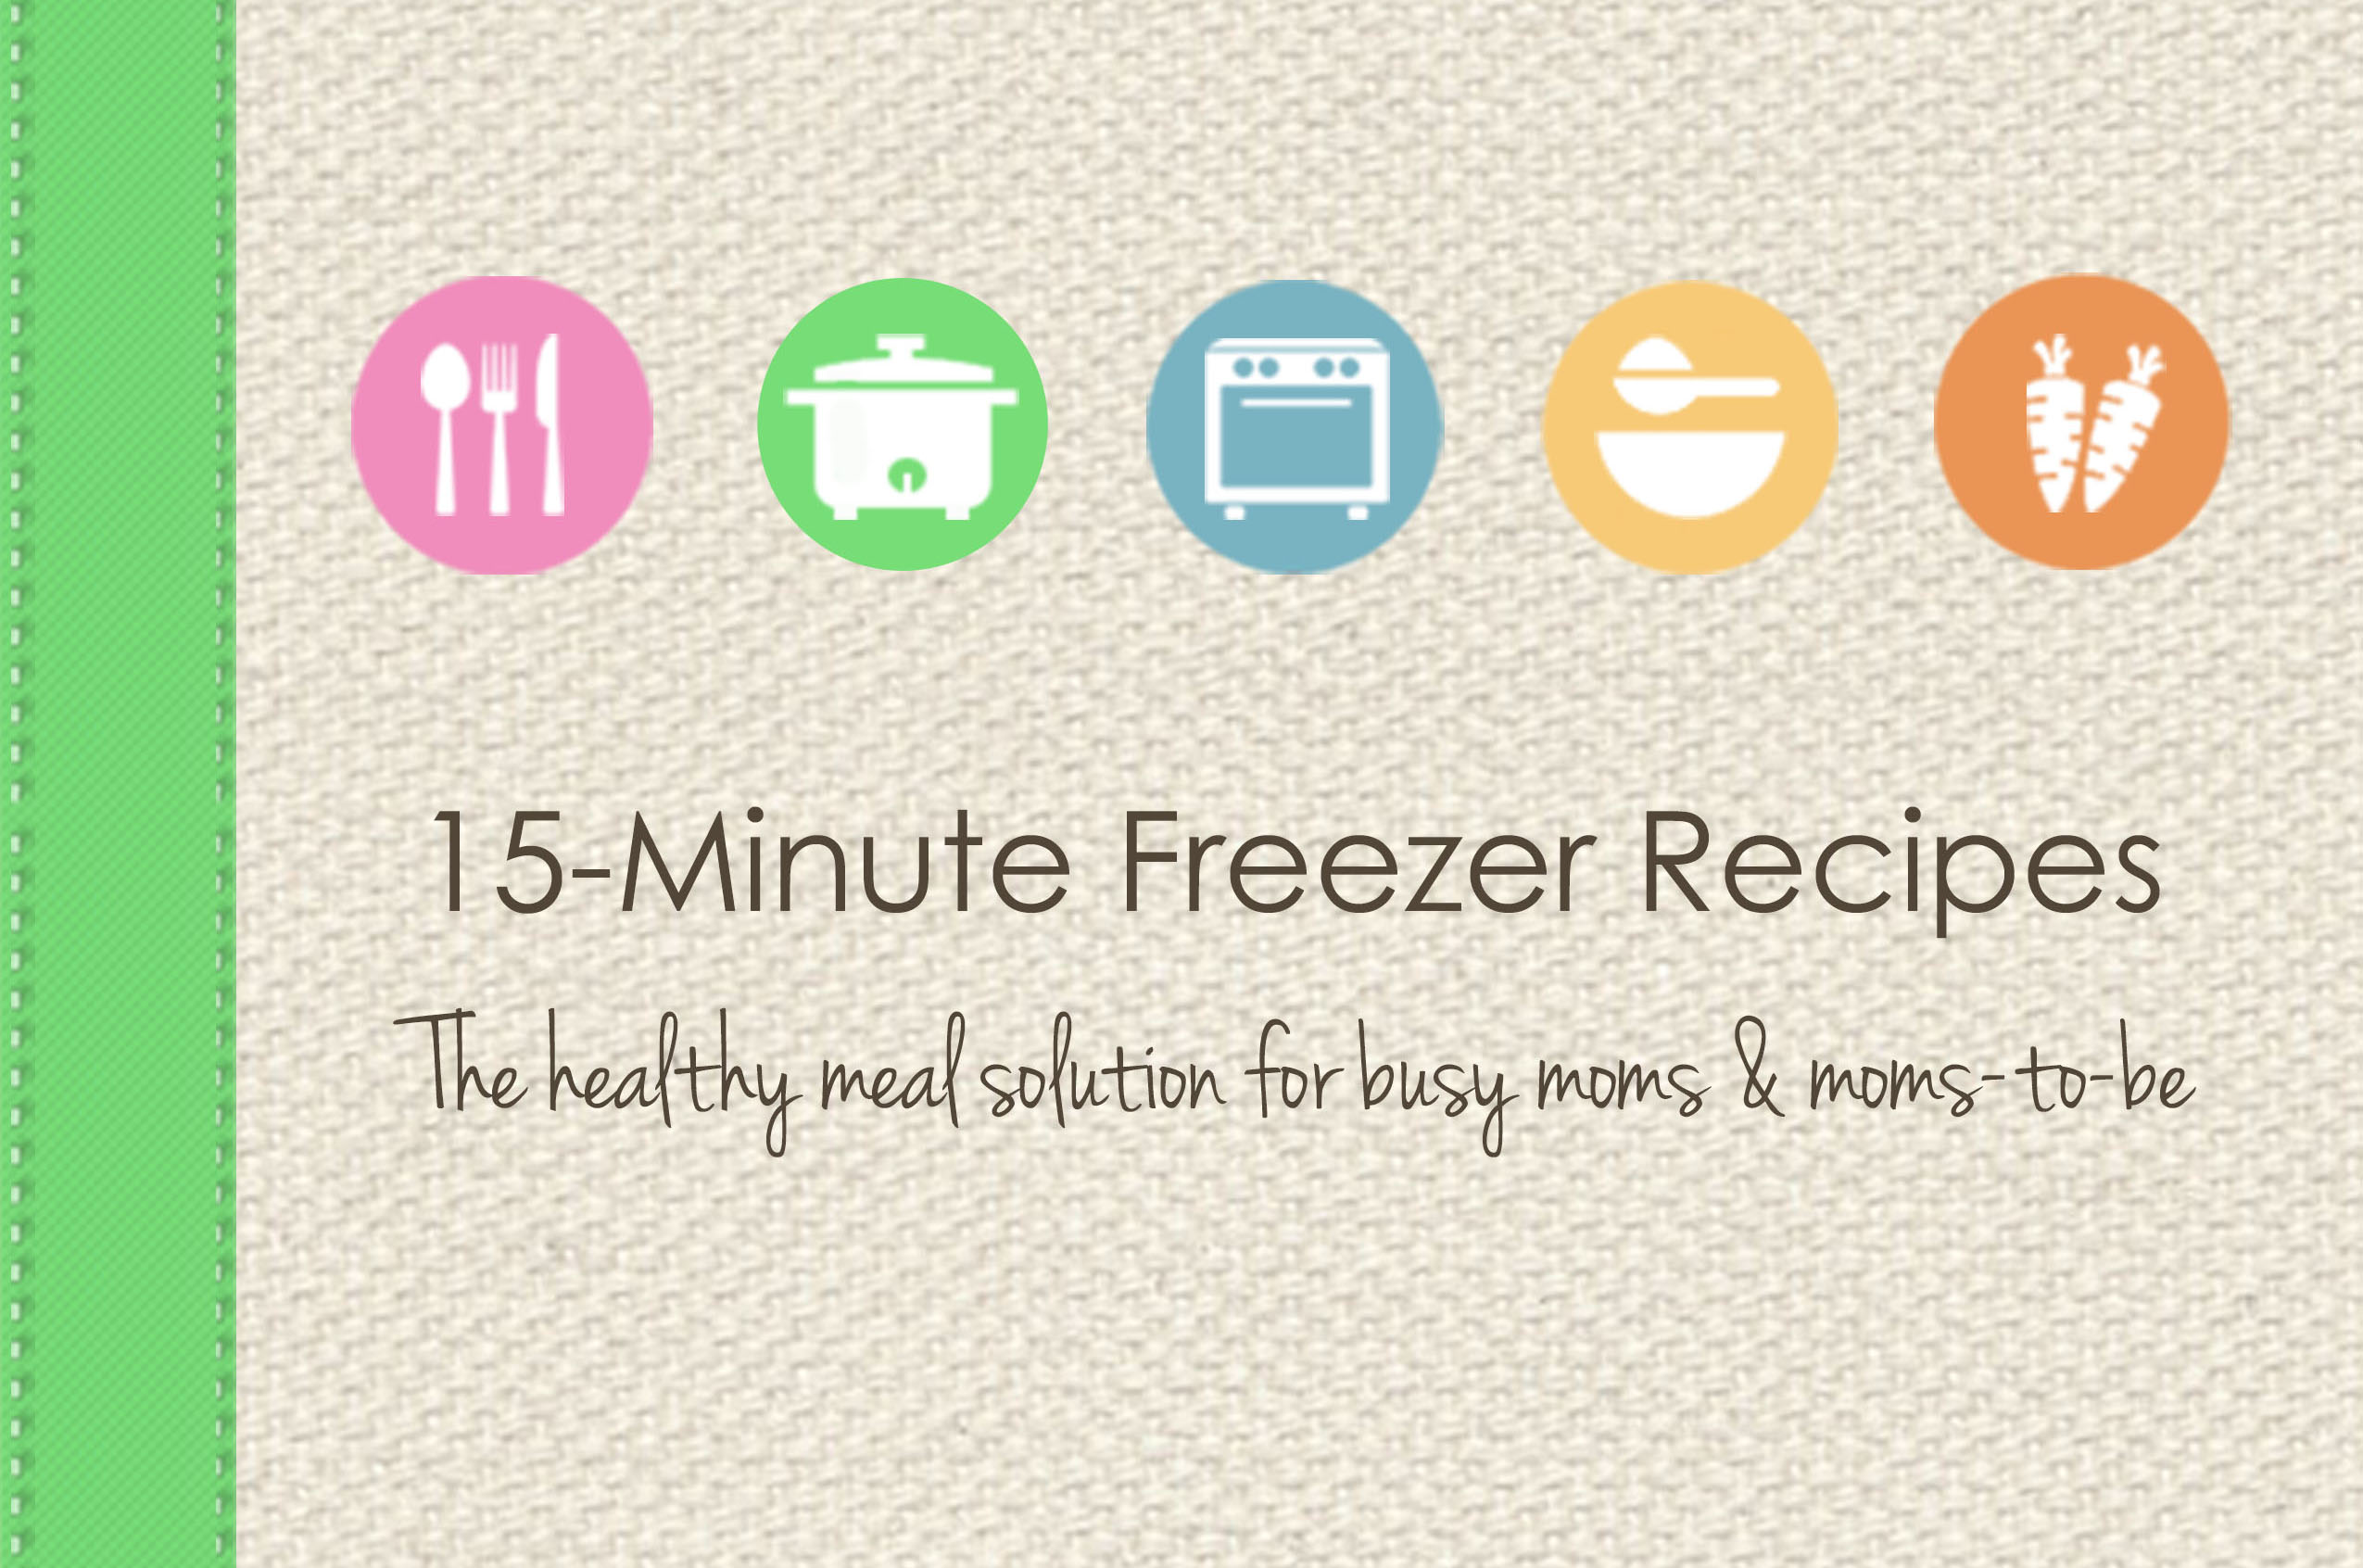 15-Minute Freezer Recipes Cookbook by Kelly McNelis and New Leaf Wellness